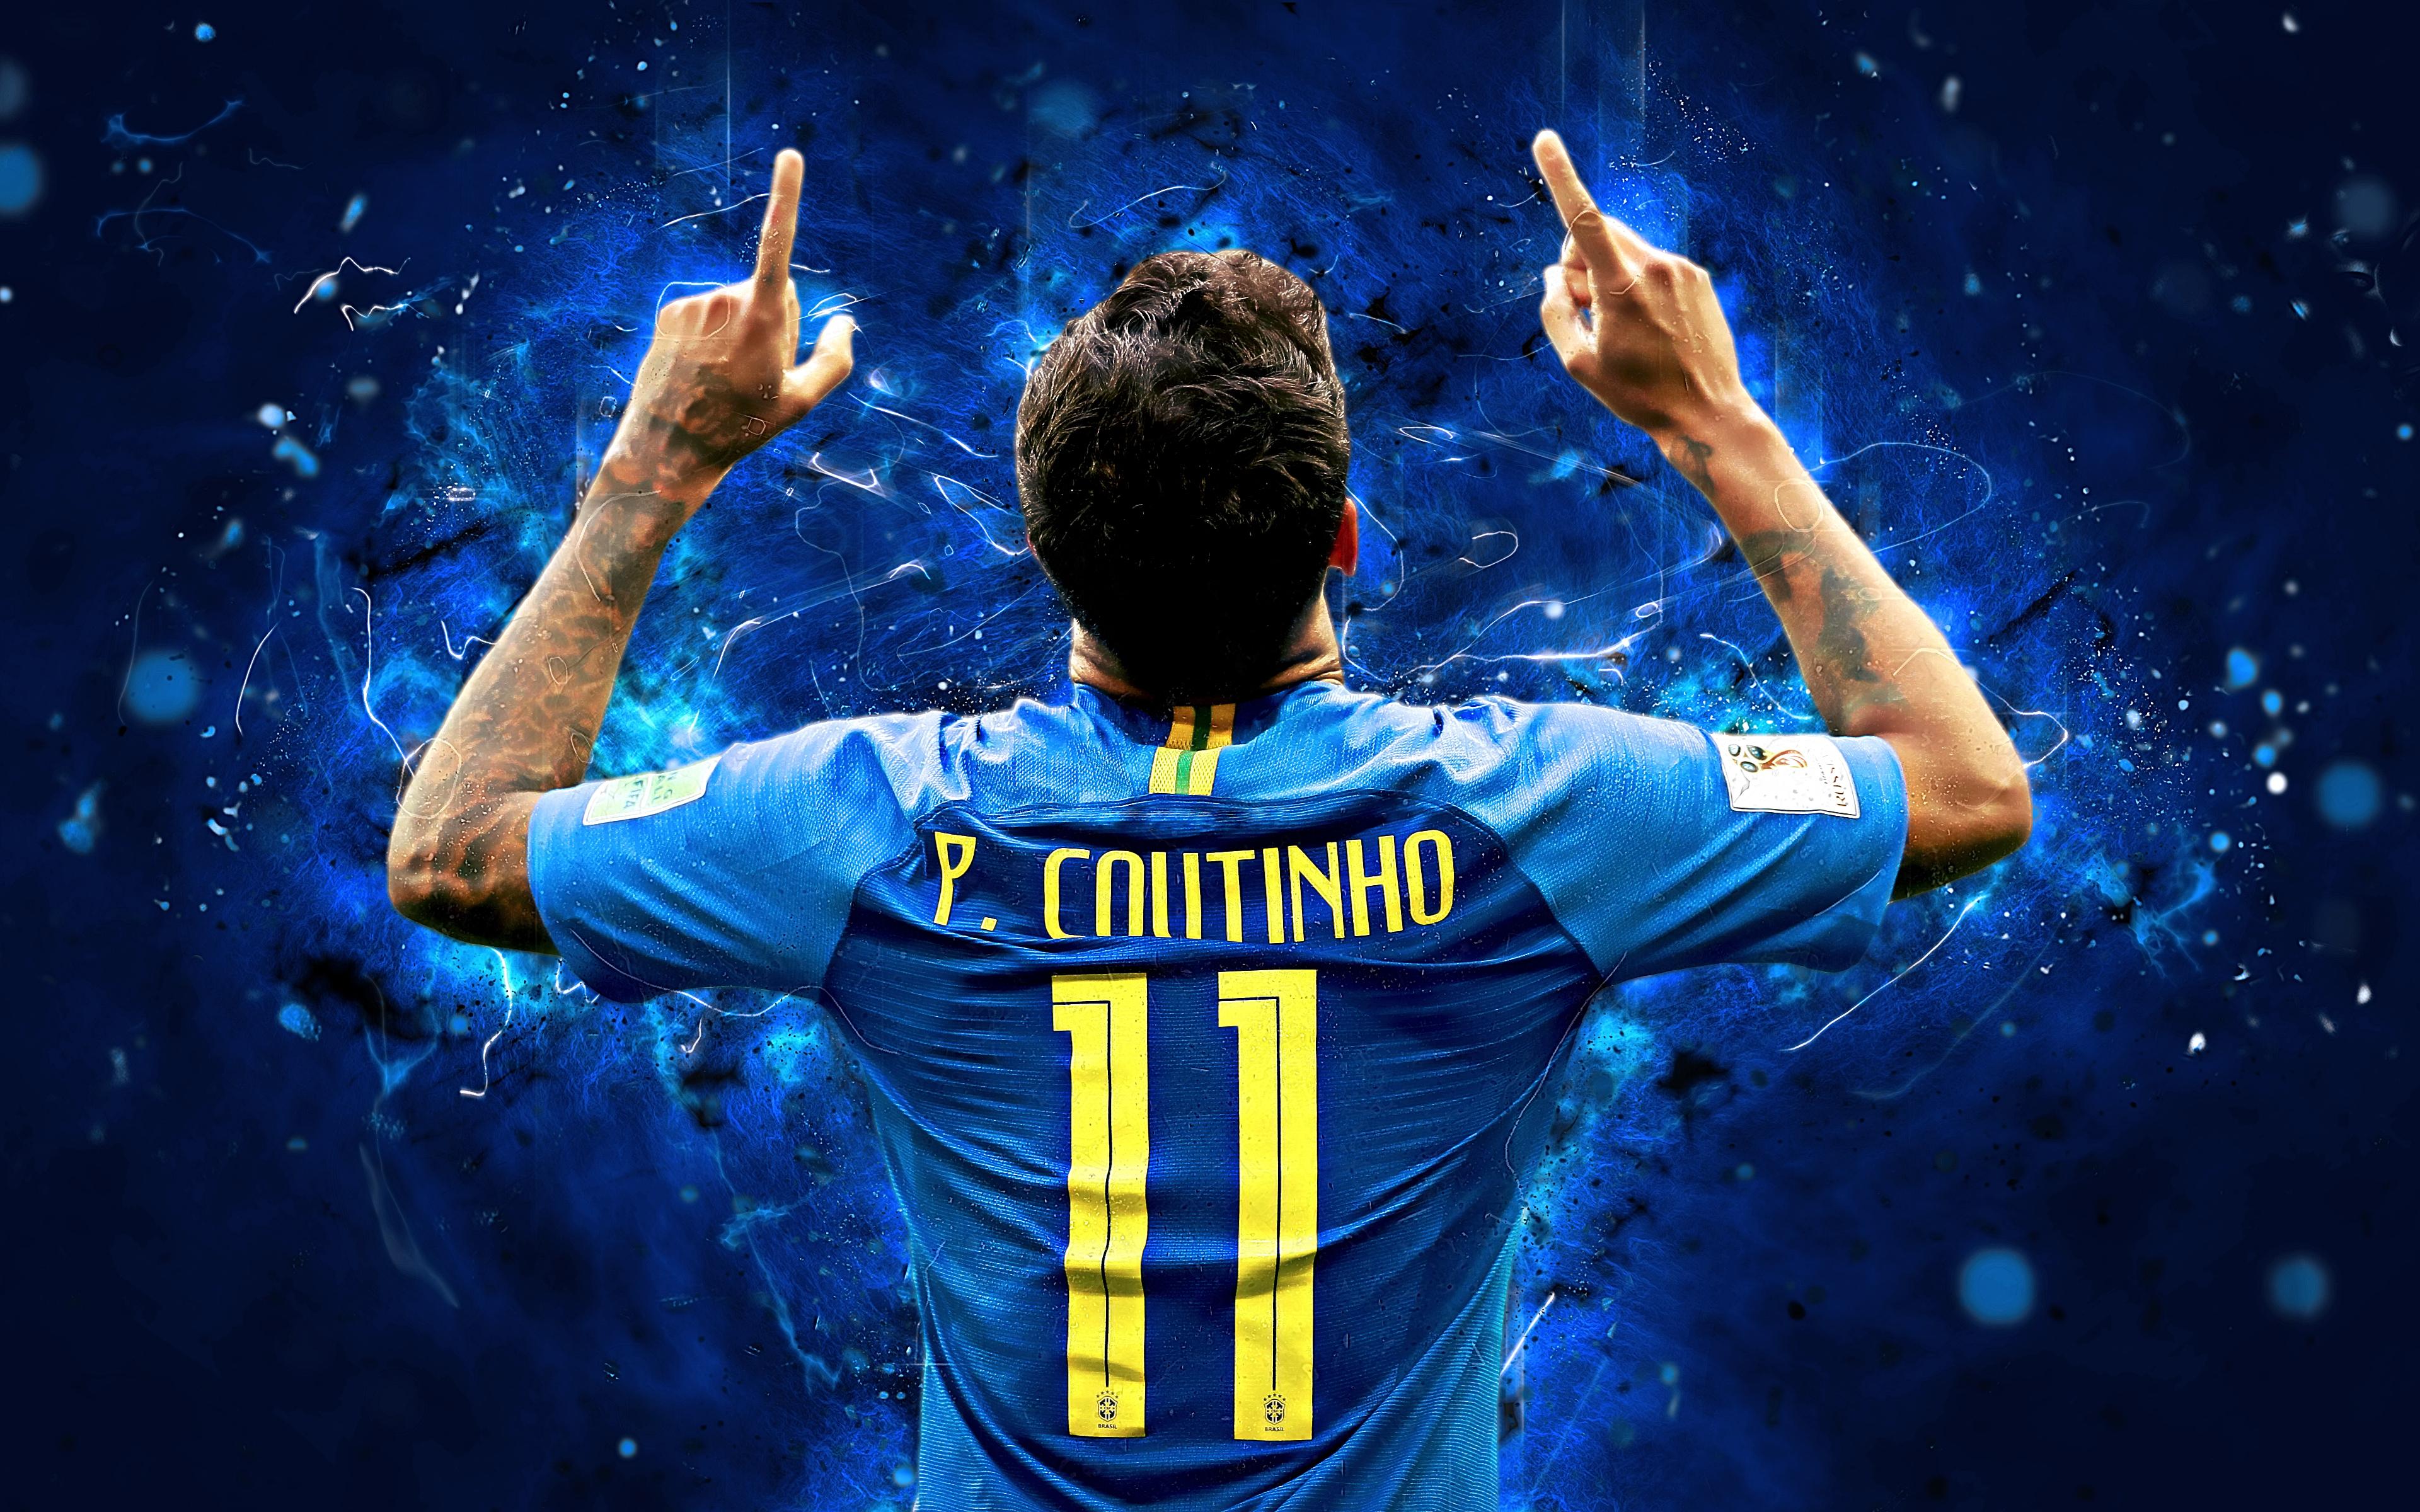 Philippe Coutinho 4k Ultra HD Wallpaper. Background Image